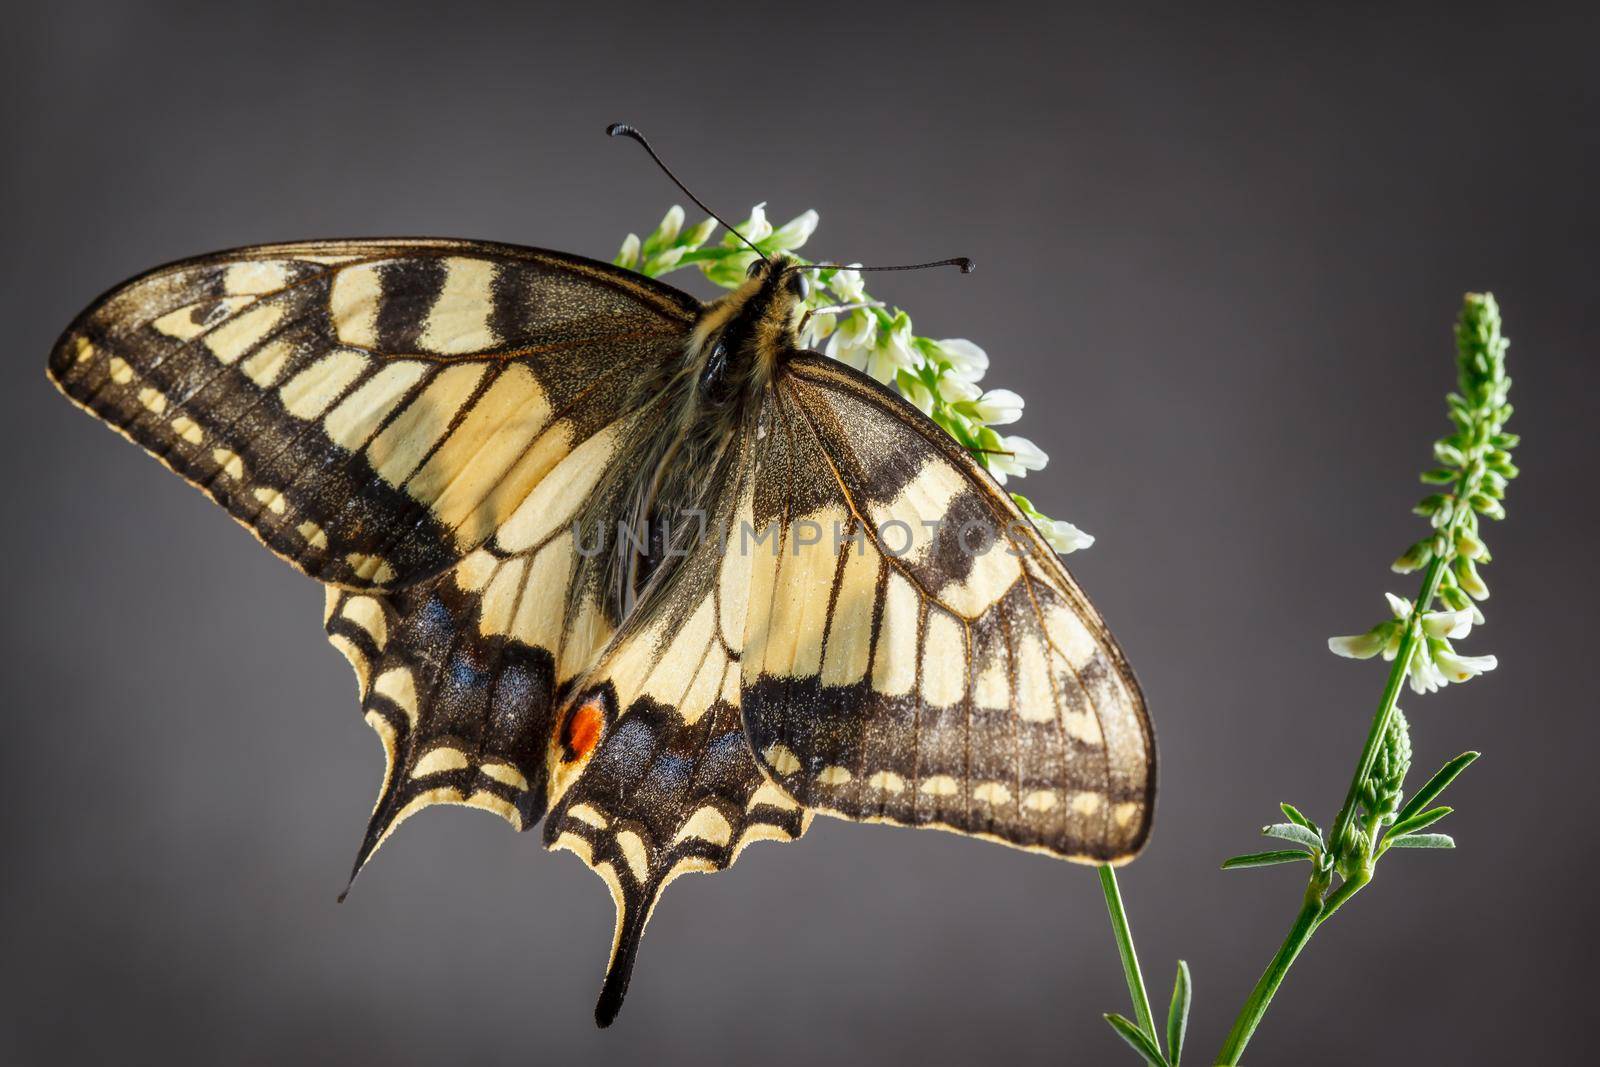 Old World swallowtail butterfly by Lincikas